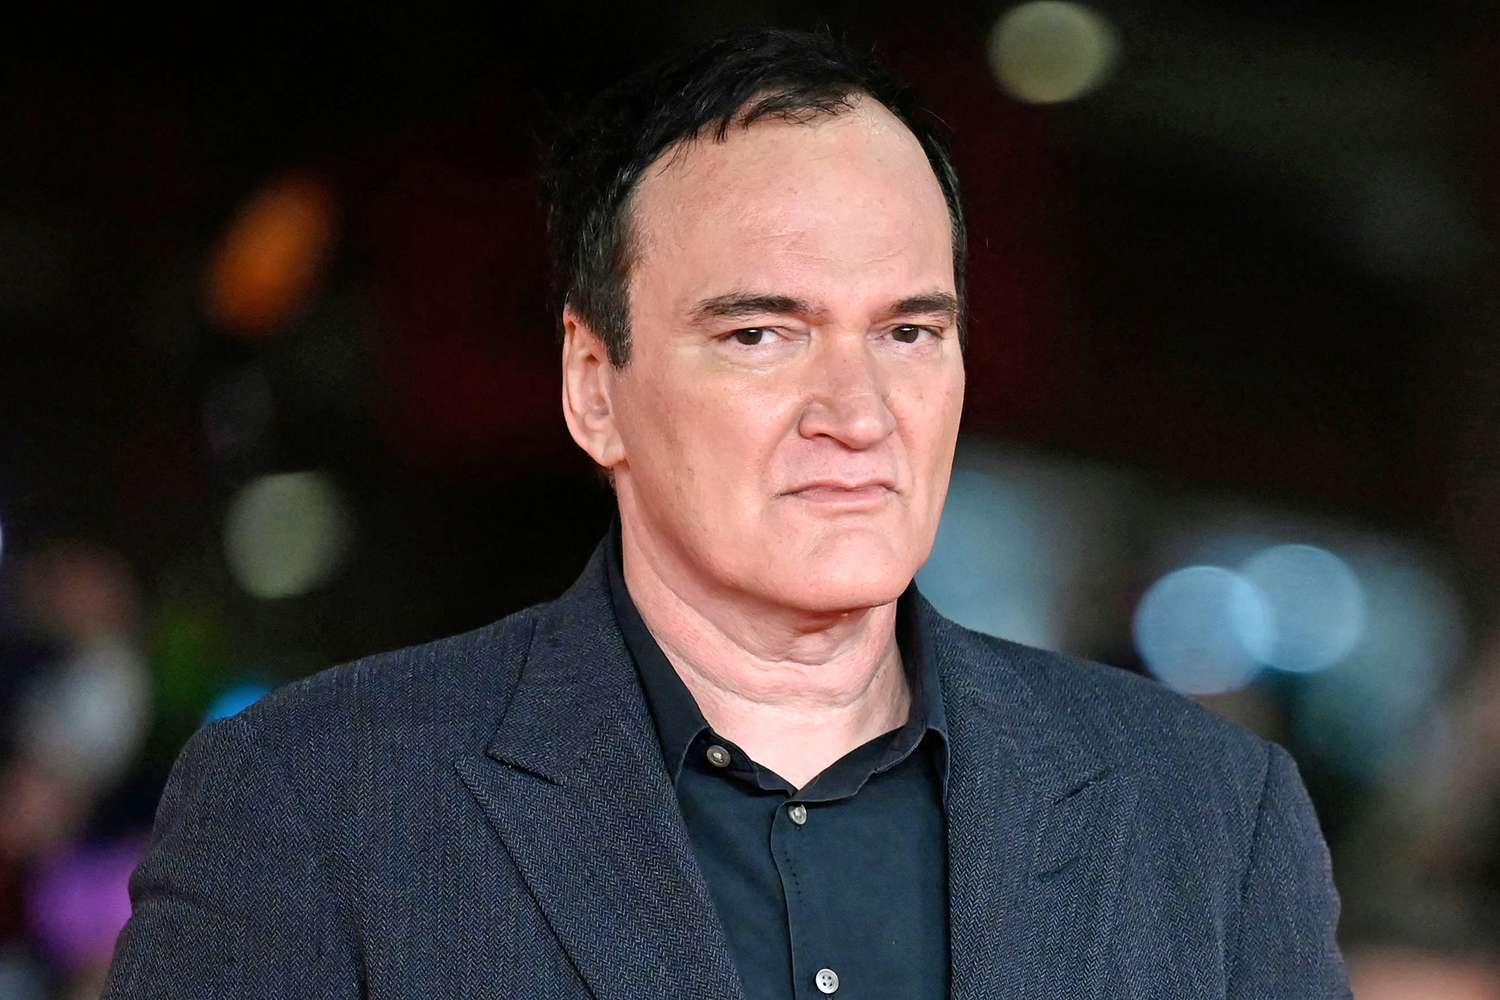 Quentin Tarantino blasts streaming movies: 'It's almost like they don't exist'